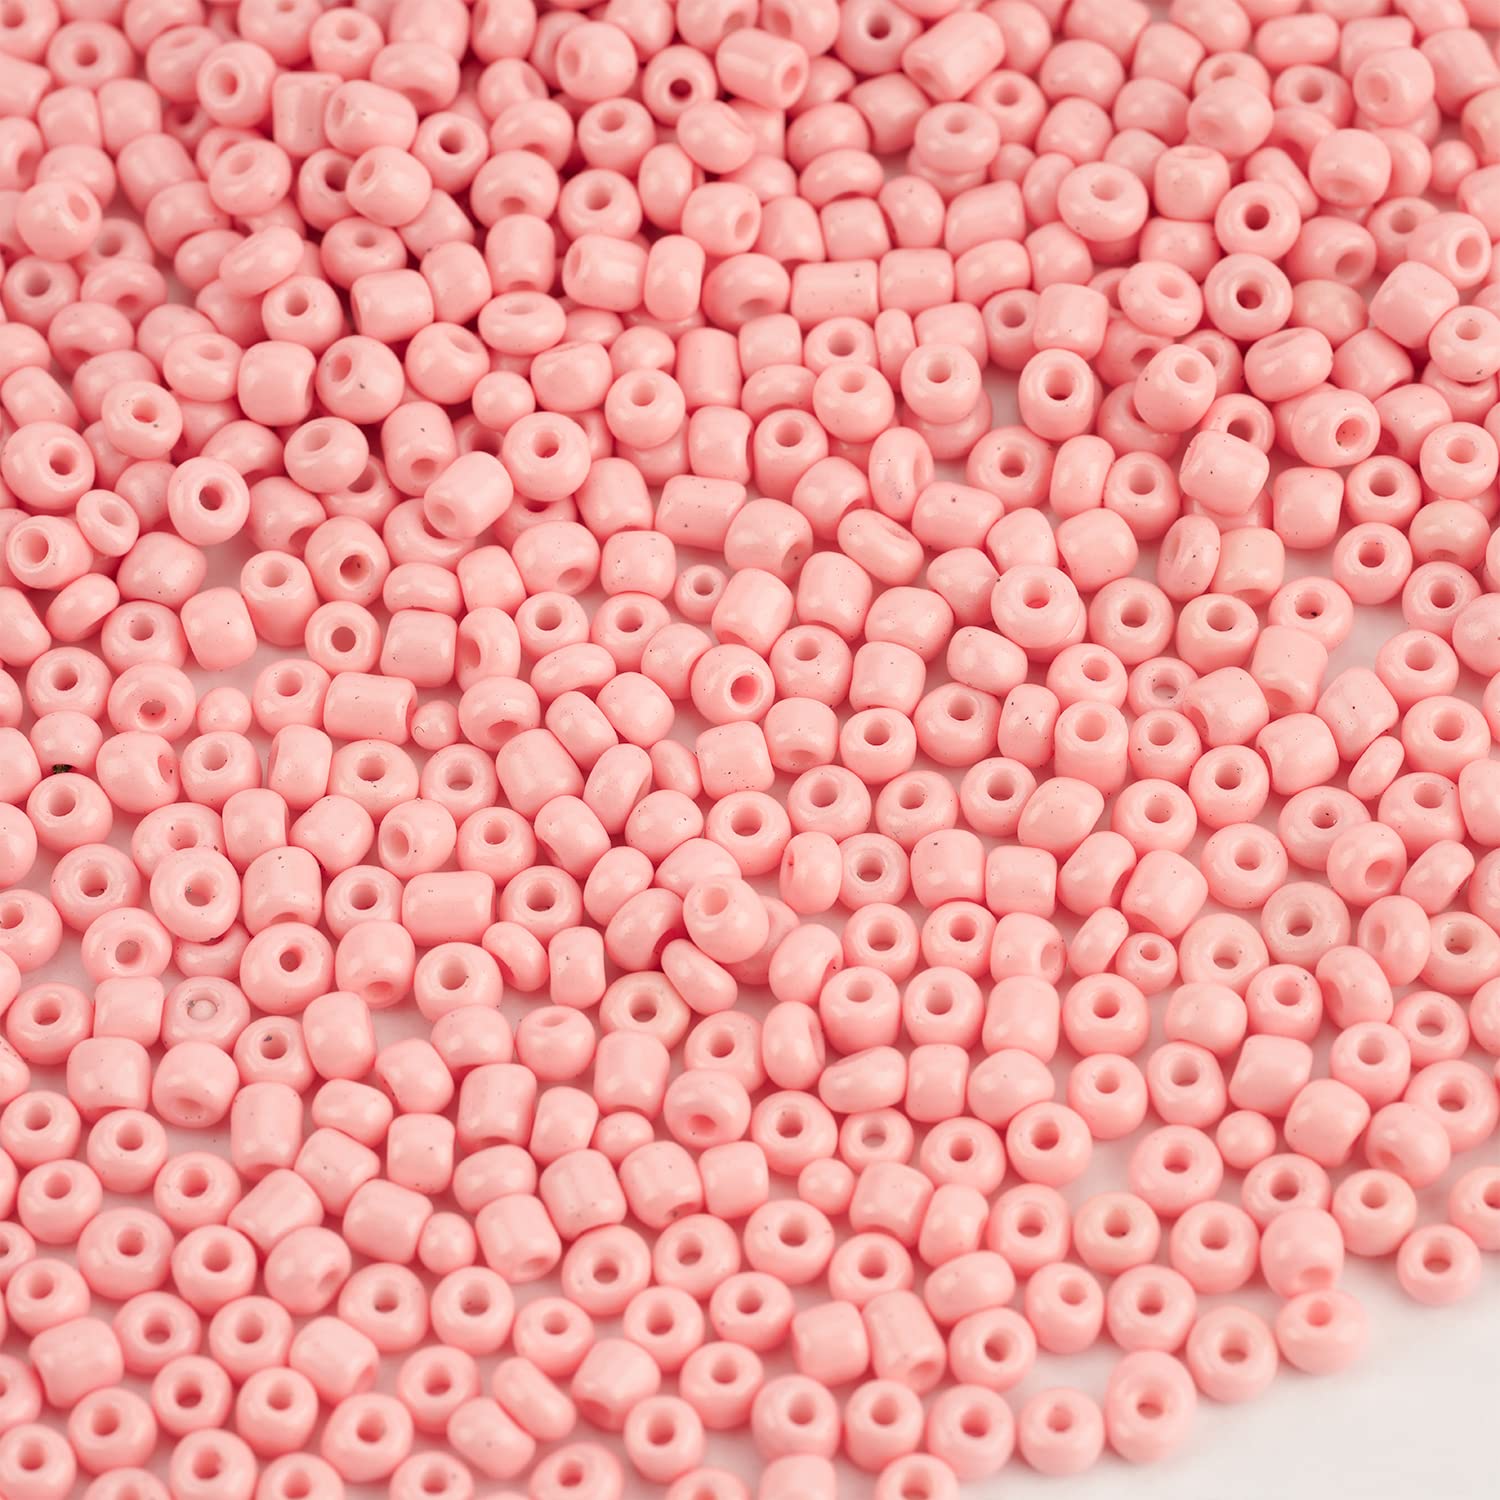 Bulk 4mm Pink Seed Beads for Jewelry Making 110 Grams About 1600pcs,6/0  Glass Craft Beads for Making Earrings, Bracelets, Pendants, Waist Jewelry,  DIY